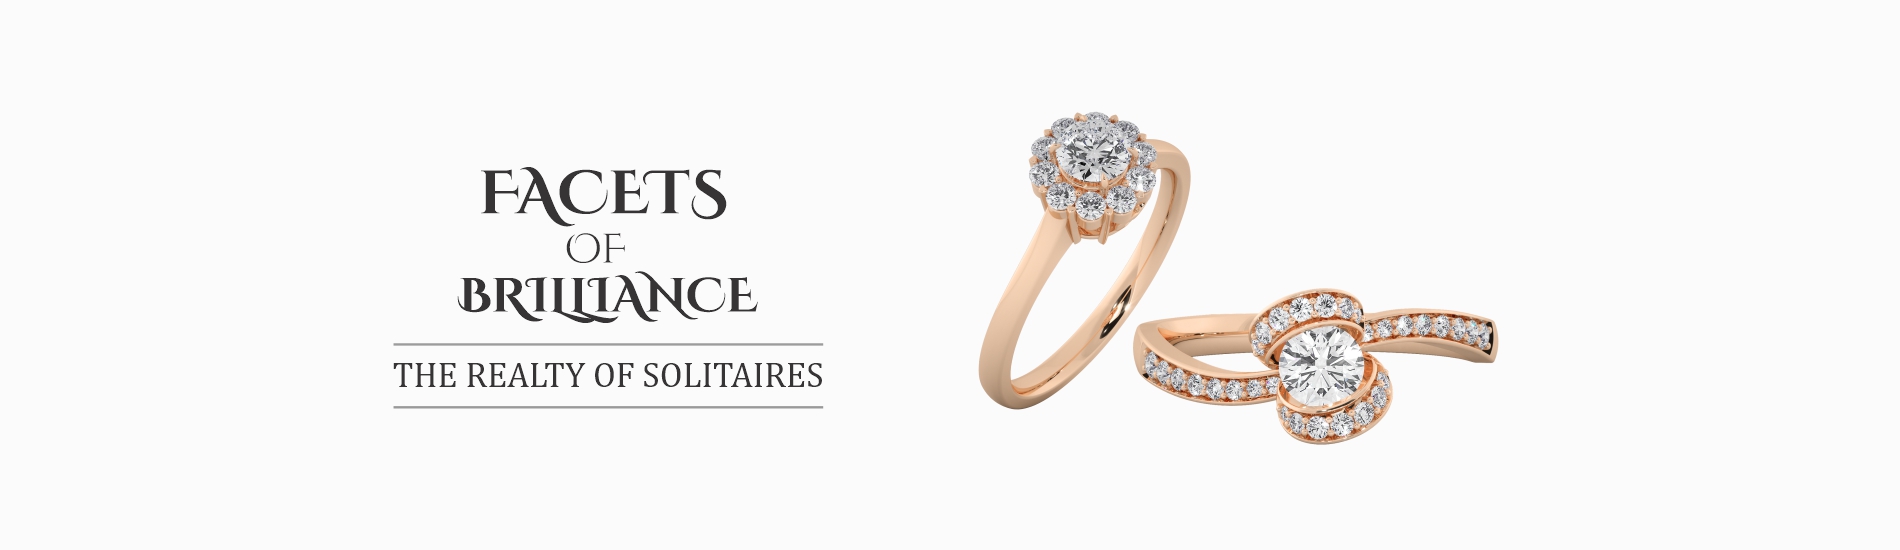 Solitaire Rings ONline